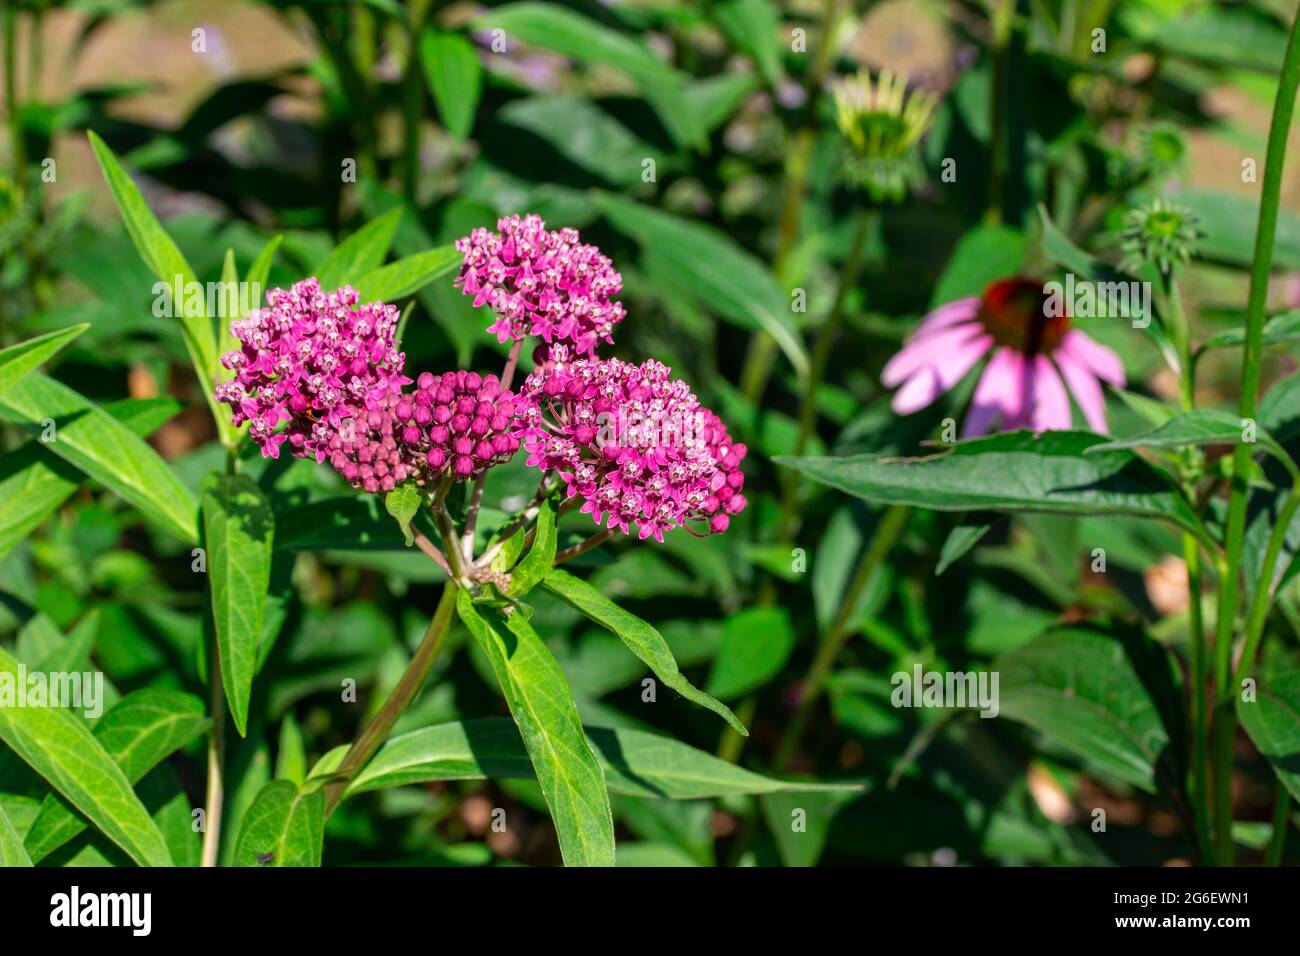 This image shows a macro abstract texture background of vibrant emerging rosy pink blossoms and buds on a swamp milkweed plant (asclepias incarnata) i Stock Photo